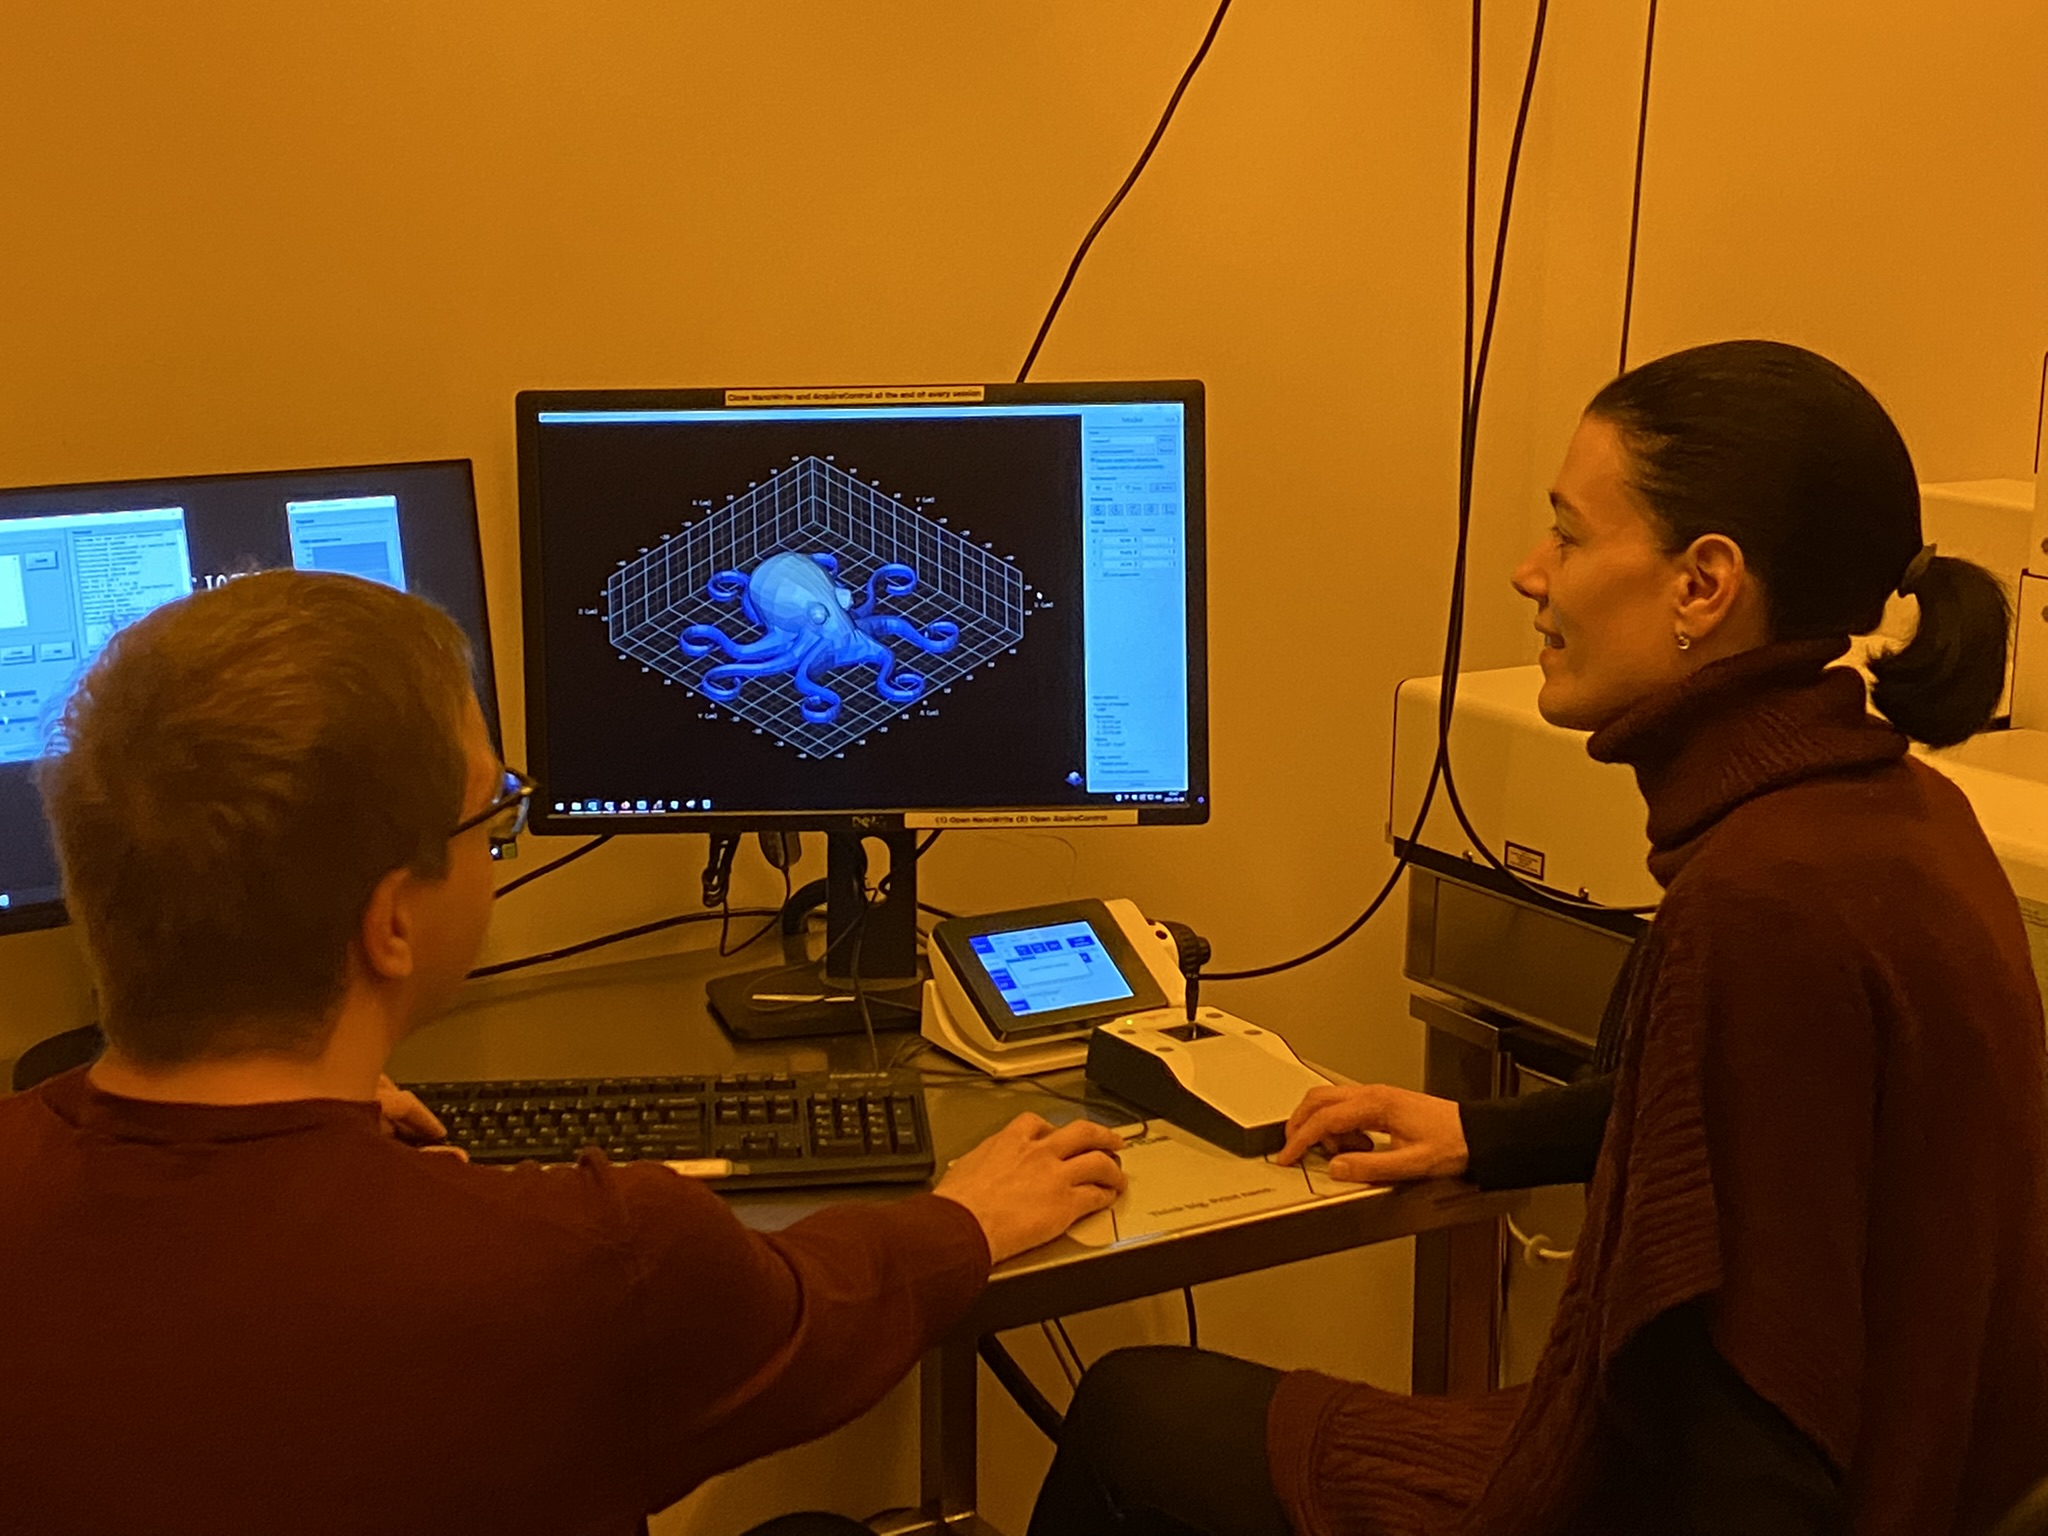 Professor and staff sitting in front of a computer screen on which an octopus has been modelled three-dimensionally in a grid.